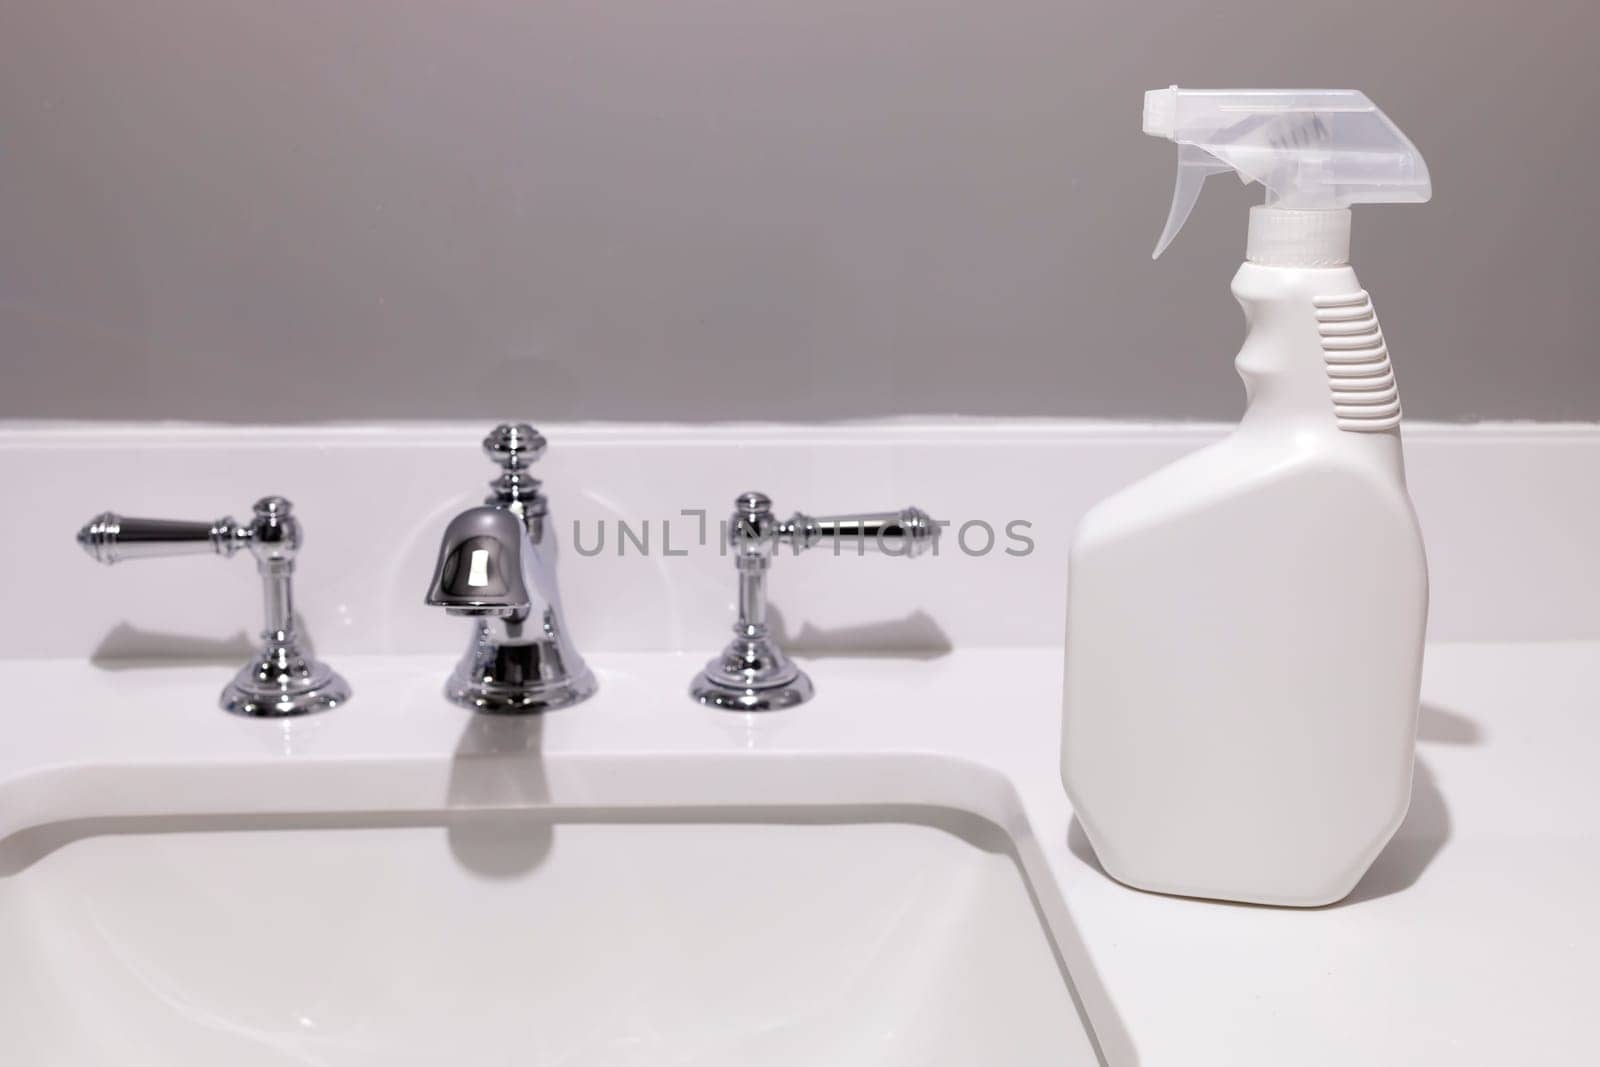 White Blank Plastic Spray Bottle On White Sink In Bathroom. Packaging Mockup. Unaltered, Spray Bottle, Hygiene. Lifestyle. Empty Place For Text Or Logo Horizontal Plane. Sanitary High quality photo